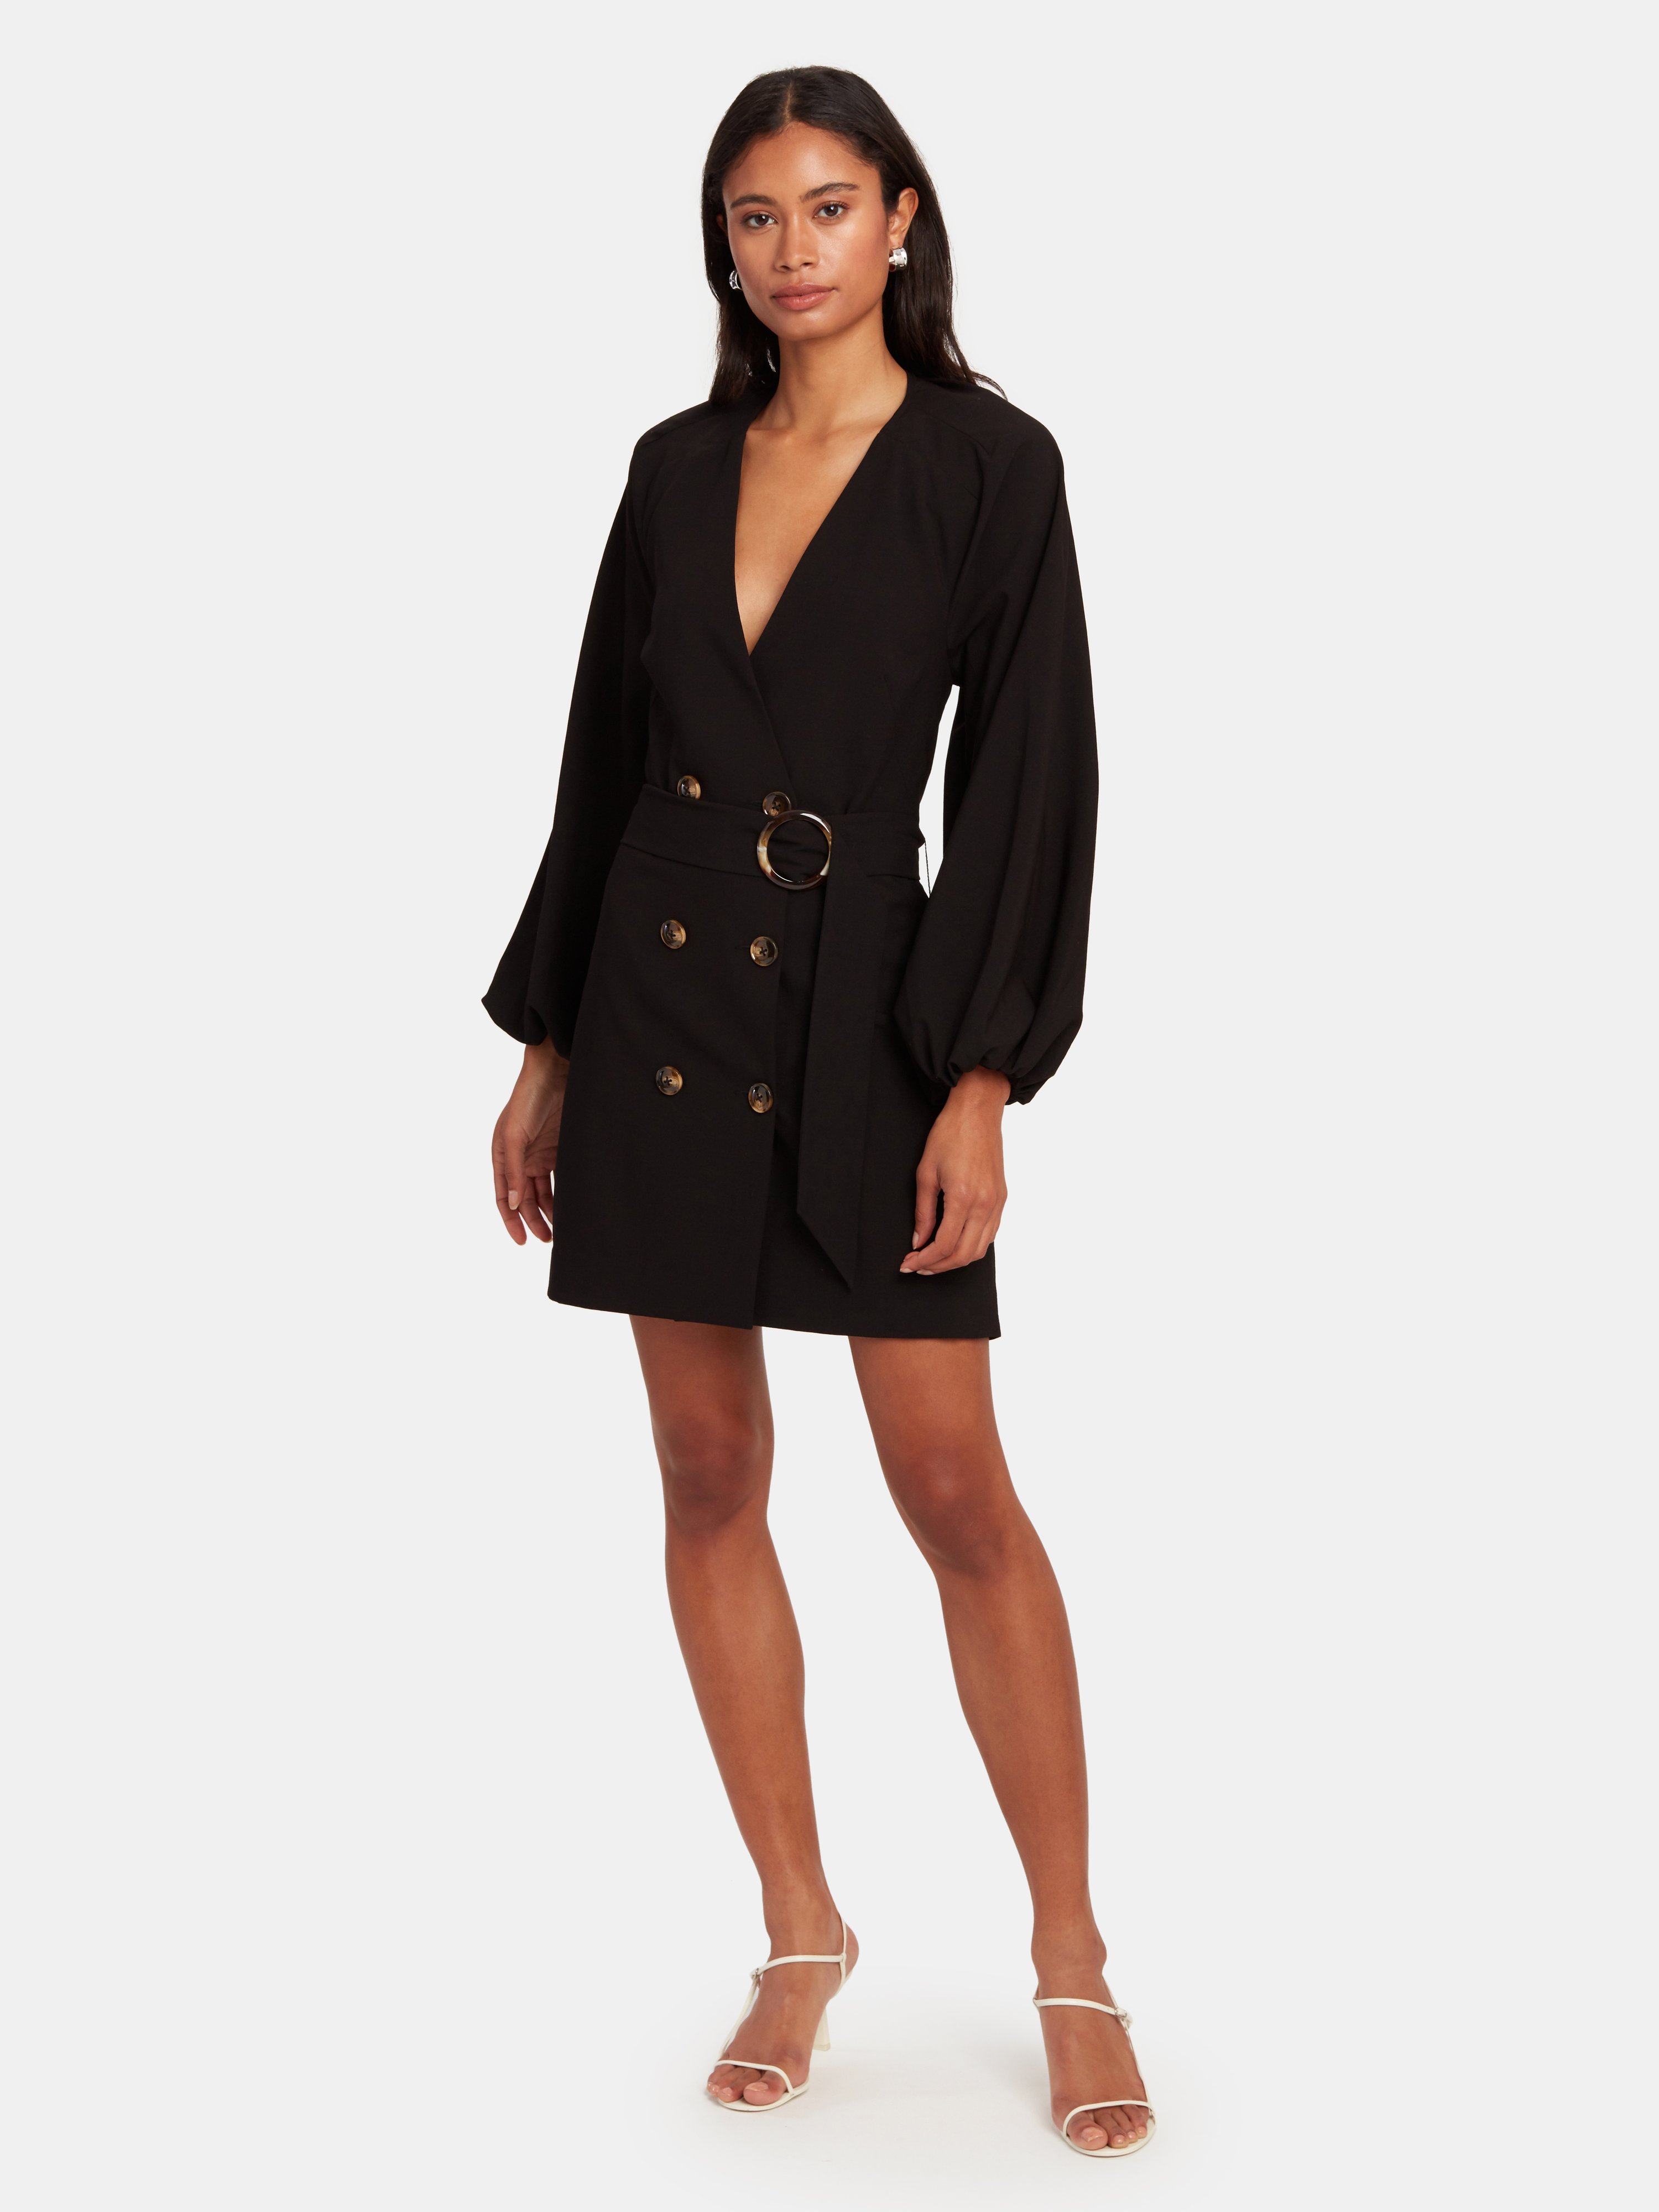 C/MEO COLLECTIVE C/MEO COLLECTIVE AVIDITY BELTED MINI DRESS